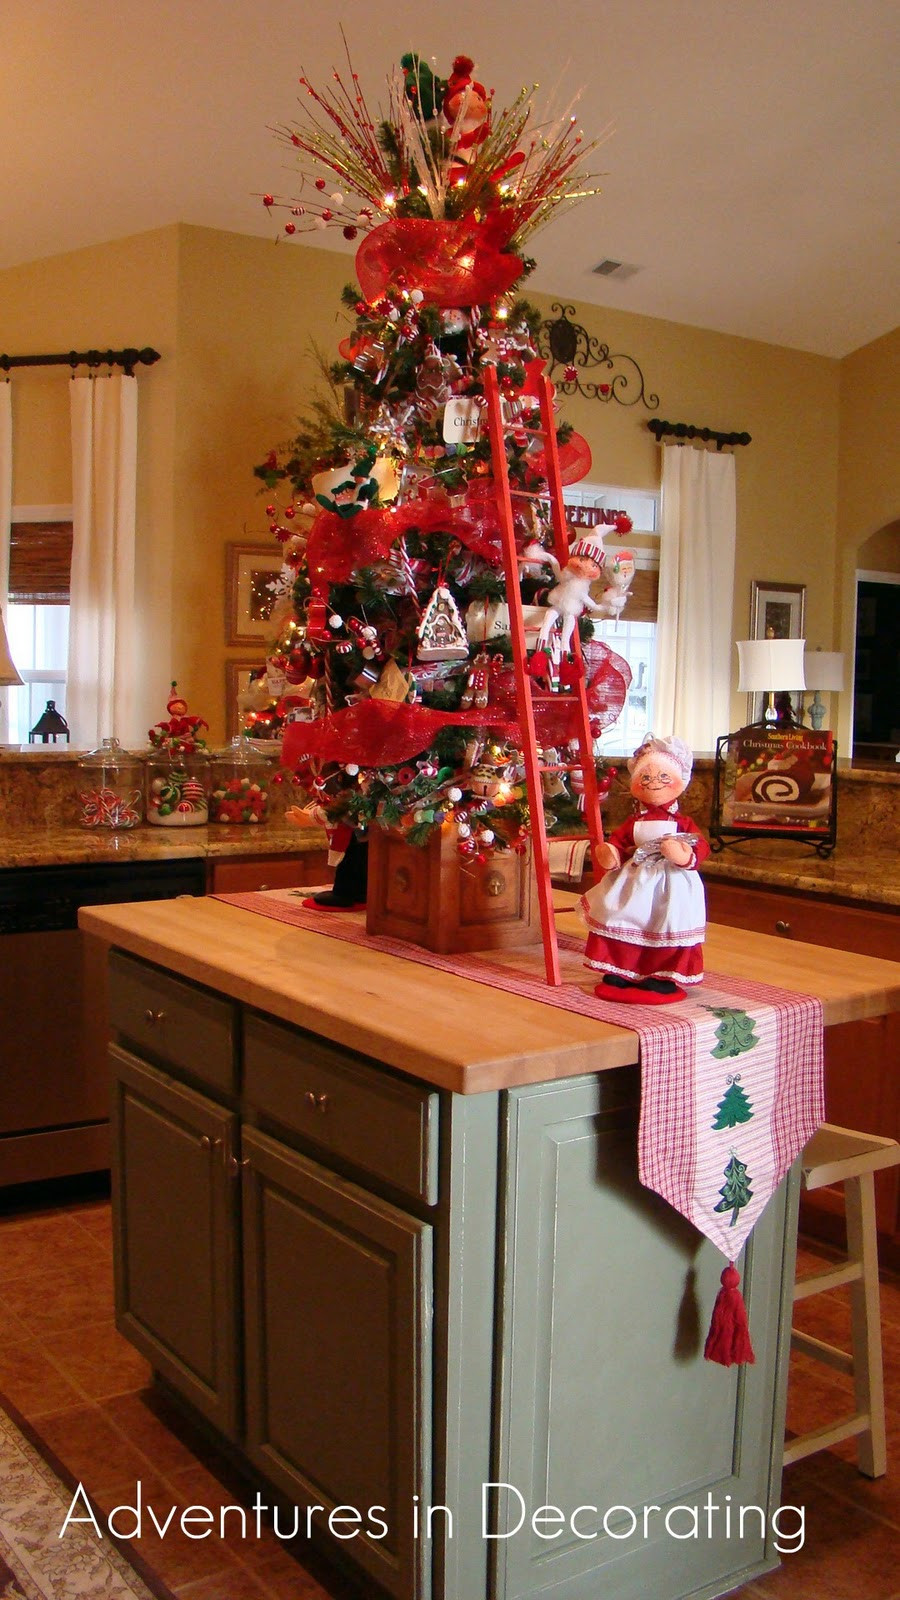 Kitchen Christmas Decor
 Adventures in Decorating Whimsical Christmas Kitchen